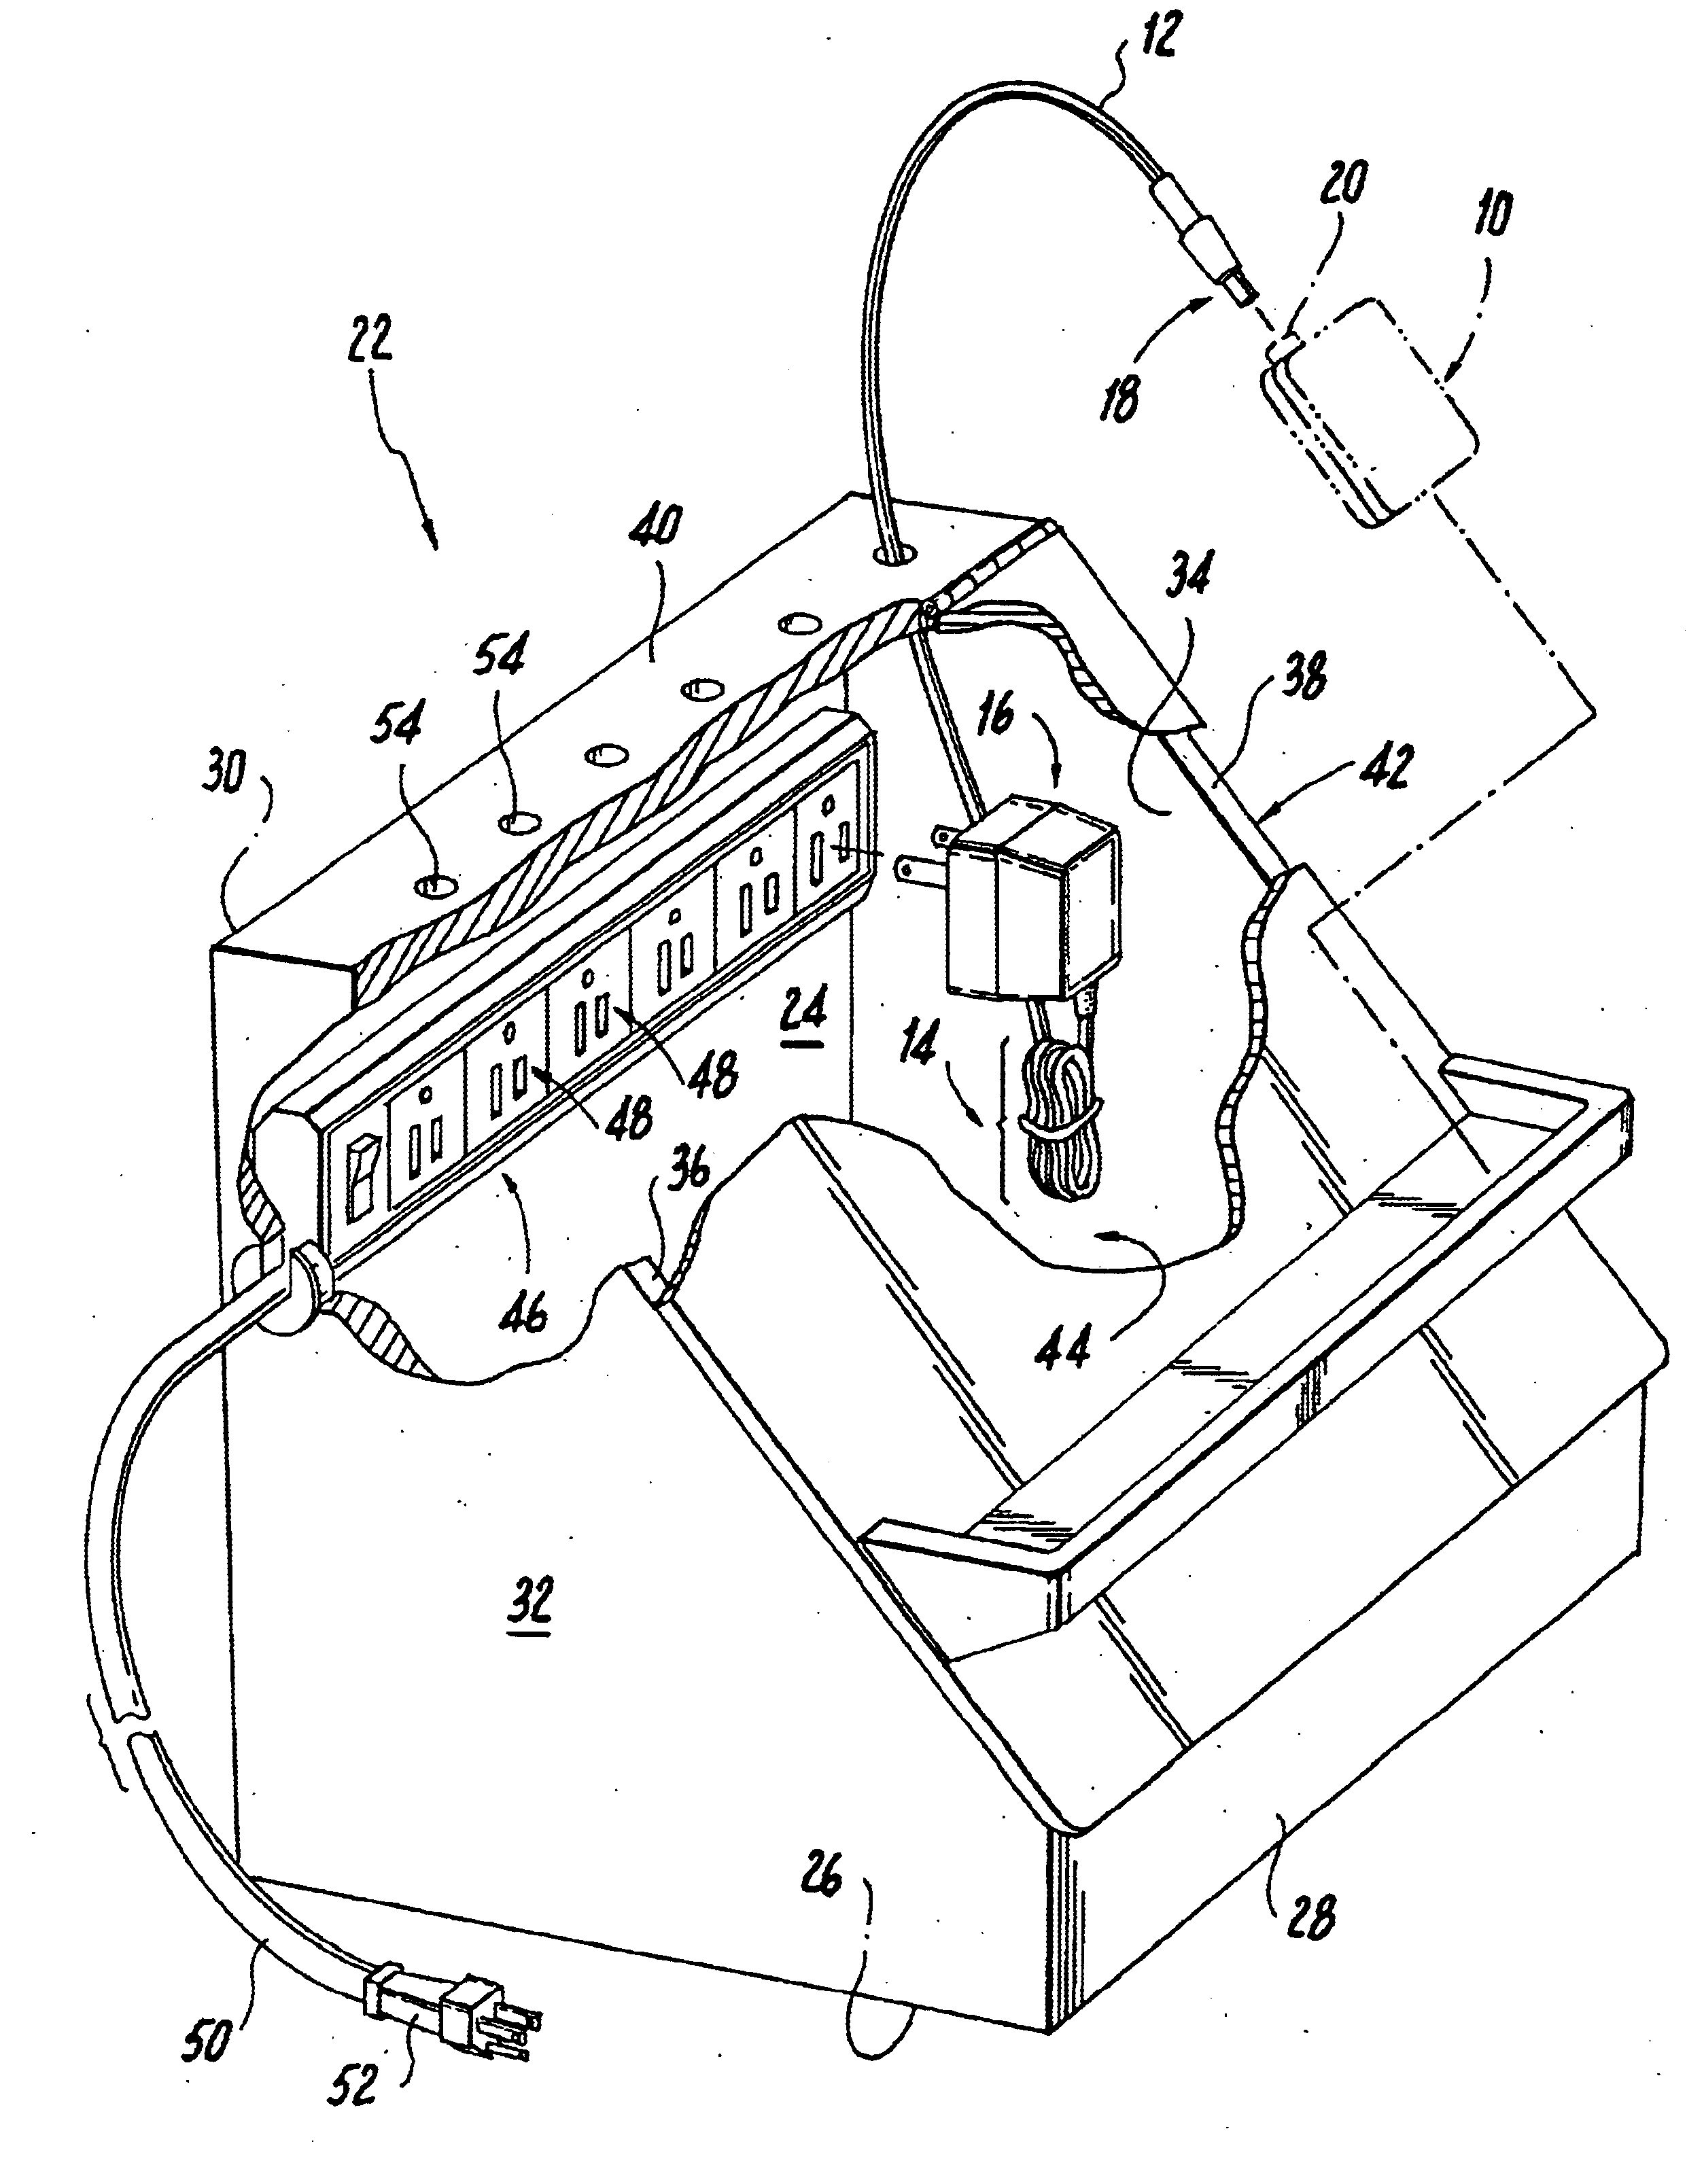 Organizer for use in the charging of electrically operated consumer products